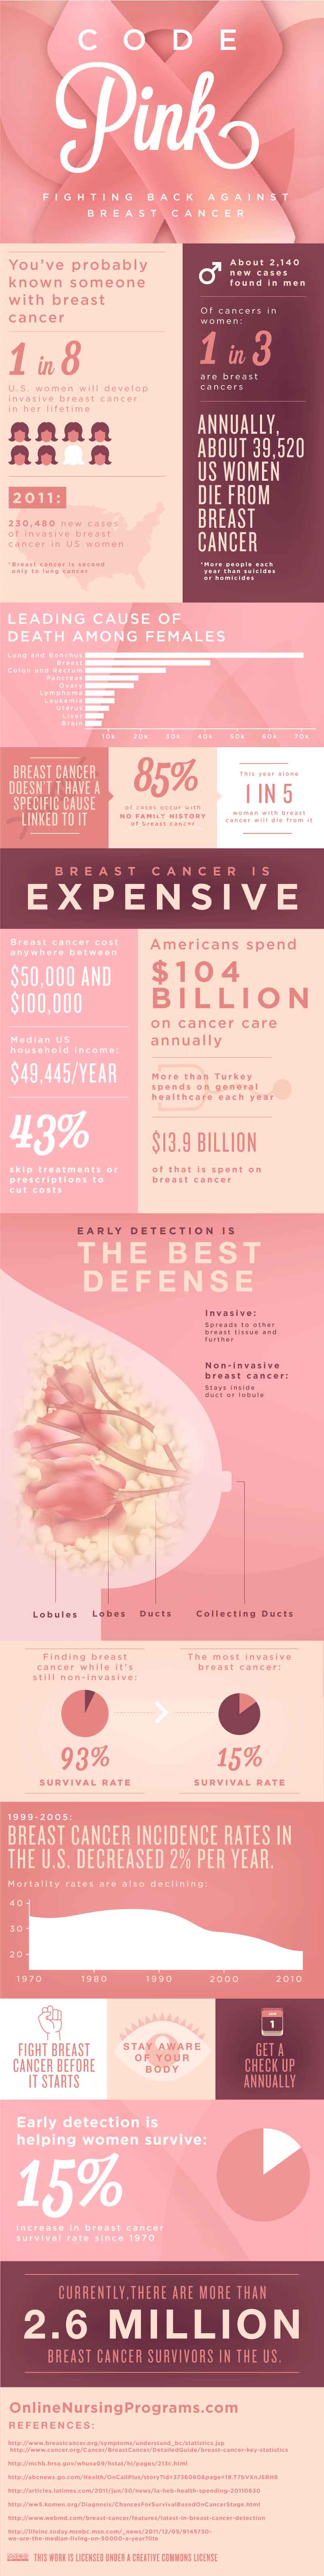 code-pink-infographic